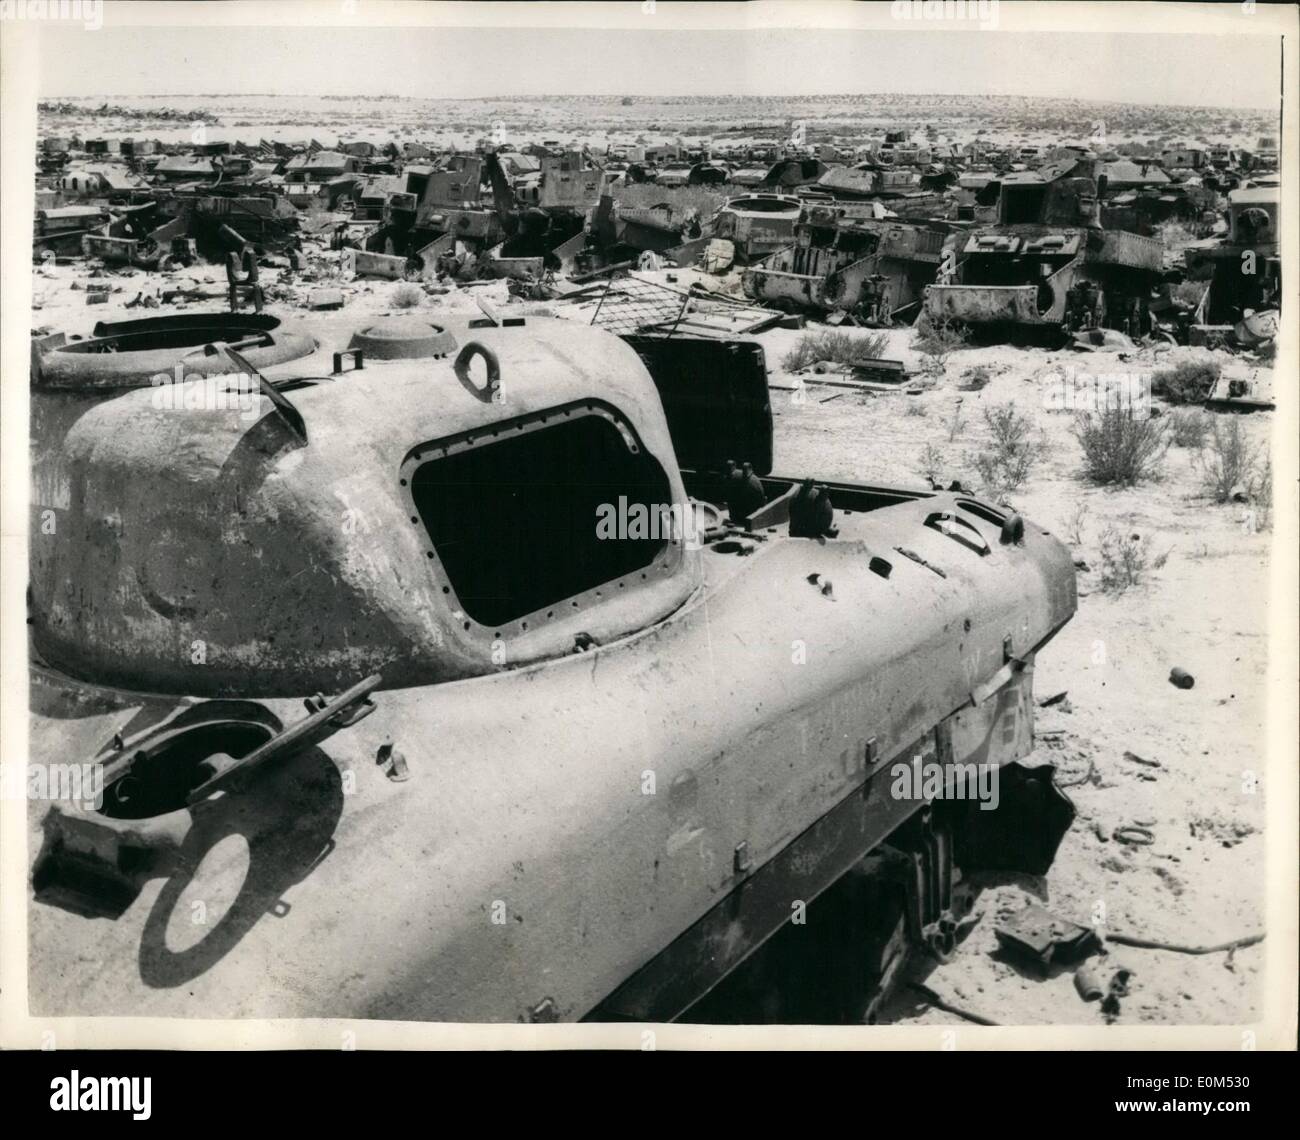 Aug. 08, 1953 - Nothing has been Moved since El Alamein days. The left - overs from war. After 11 years: For the best part of 11 years, a vast collection of tanks, burnt out in the desert fighting? is strewn in the Western Desert around Sidi Abdel Rahman relics of the desert war. Nothing has been moved and for year they have been the target for many a scrap hunting Arab. Stock Photo